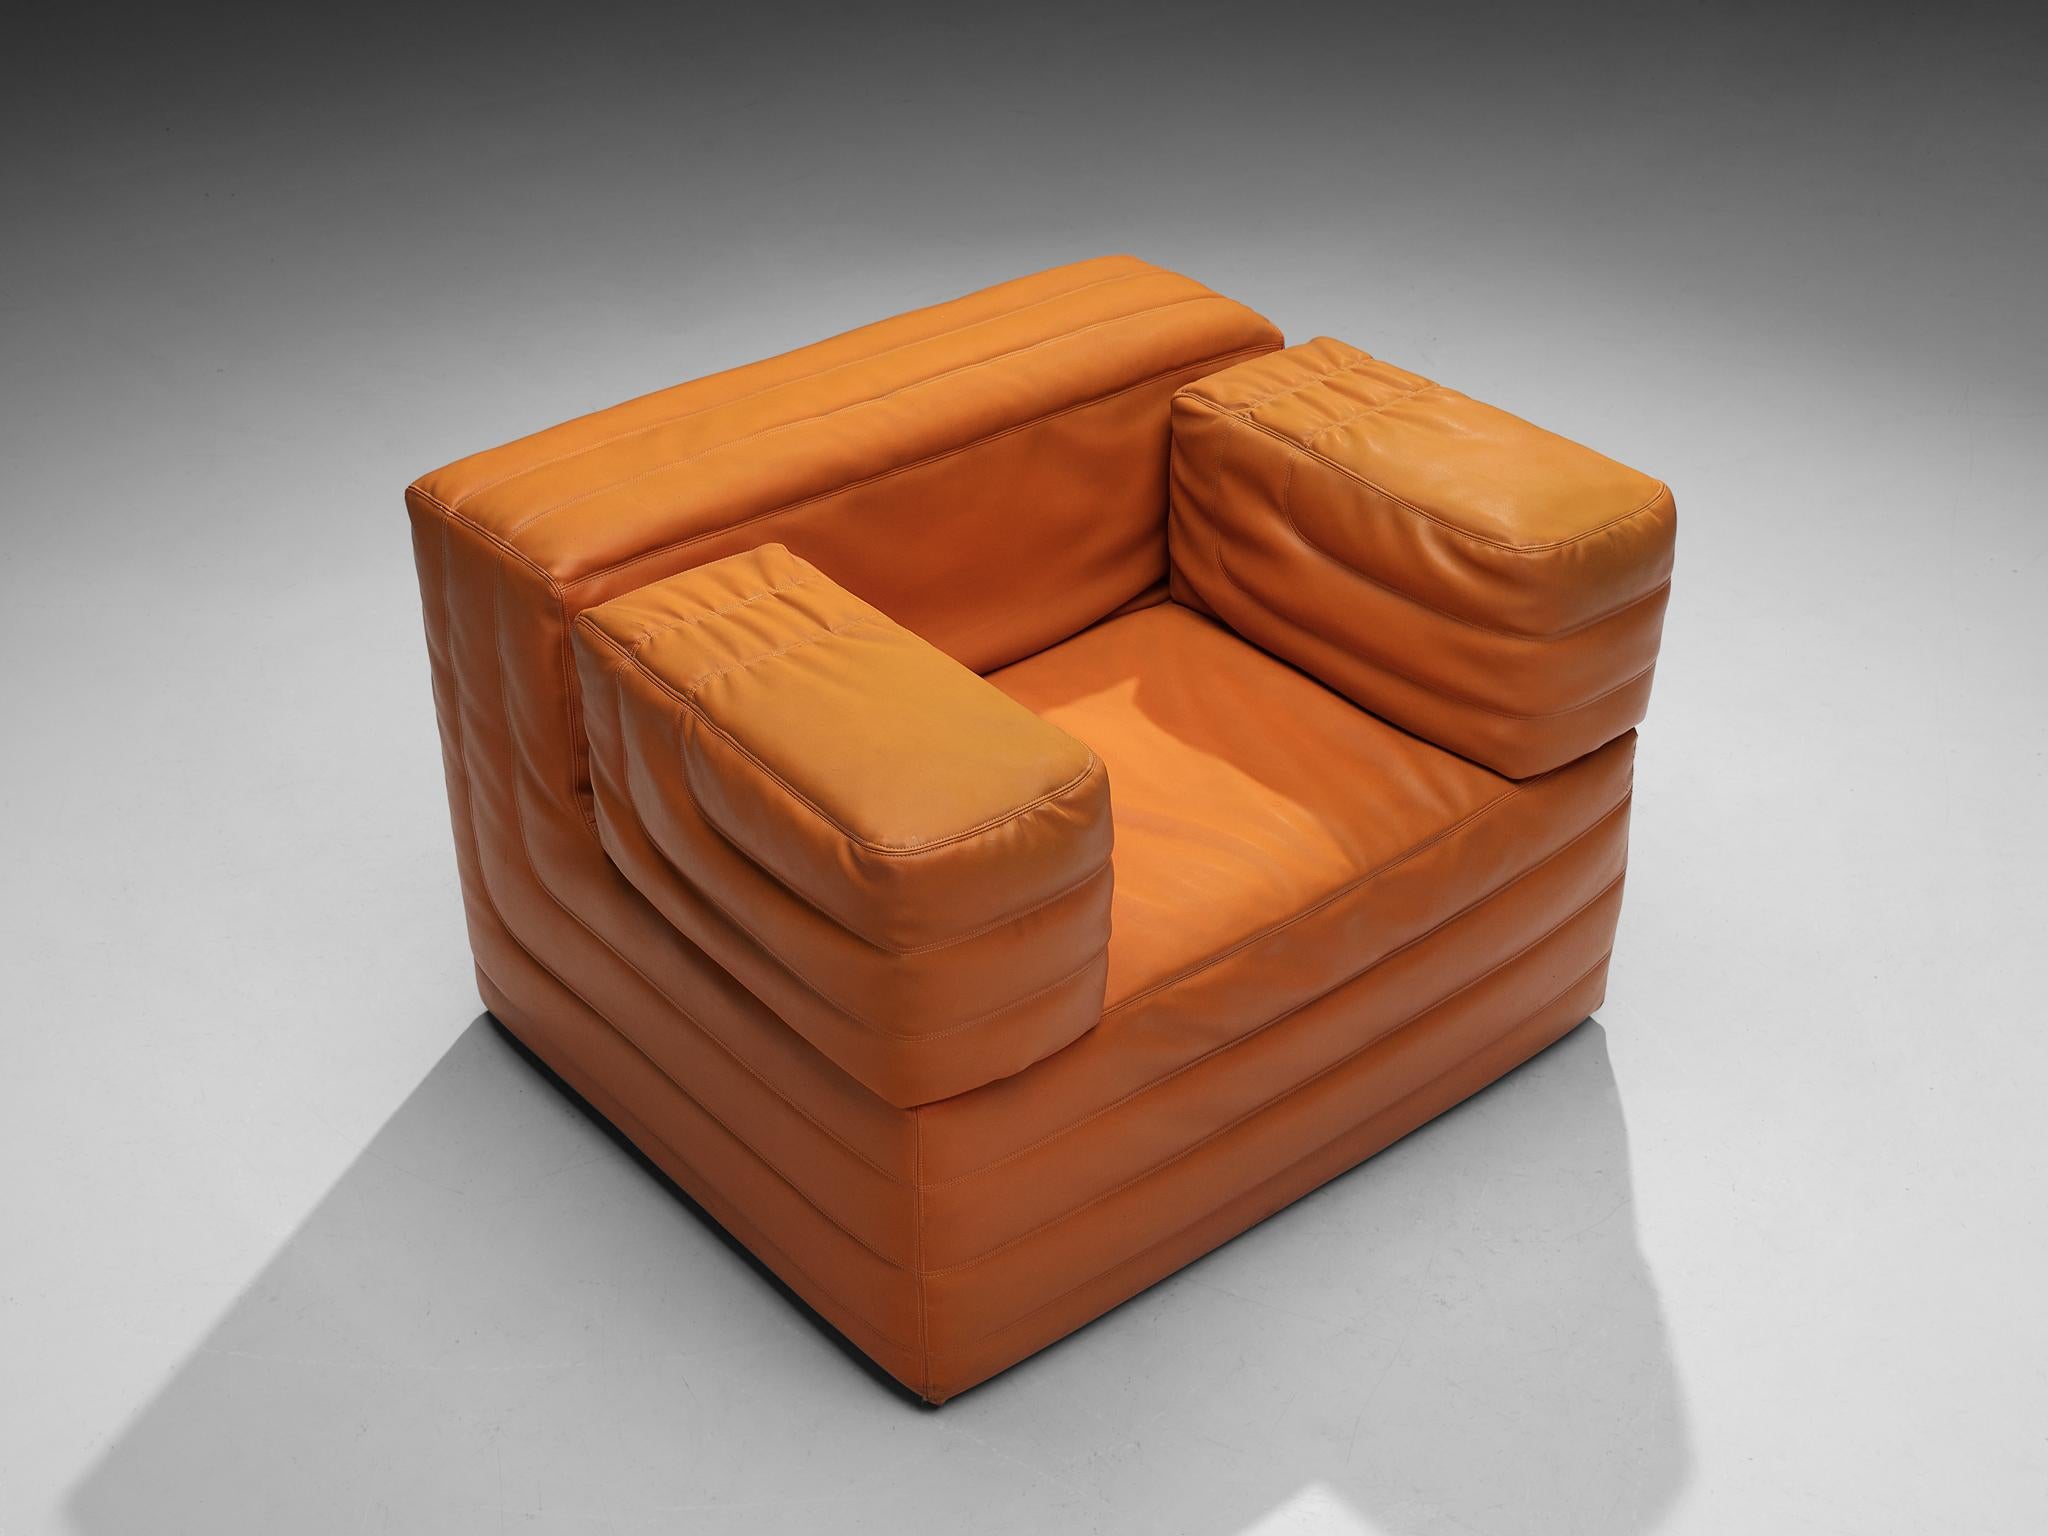 Lounge chair, leatherette, Italy, 1970s

This striking lounge chair comes with an eye-catching orange colored faux leather upholstery that gives the room a vibrant and lively touch. The design is further characterized by geometrical sharp lines